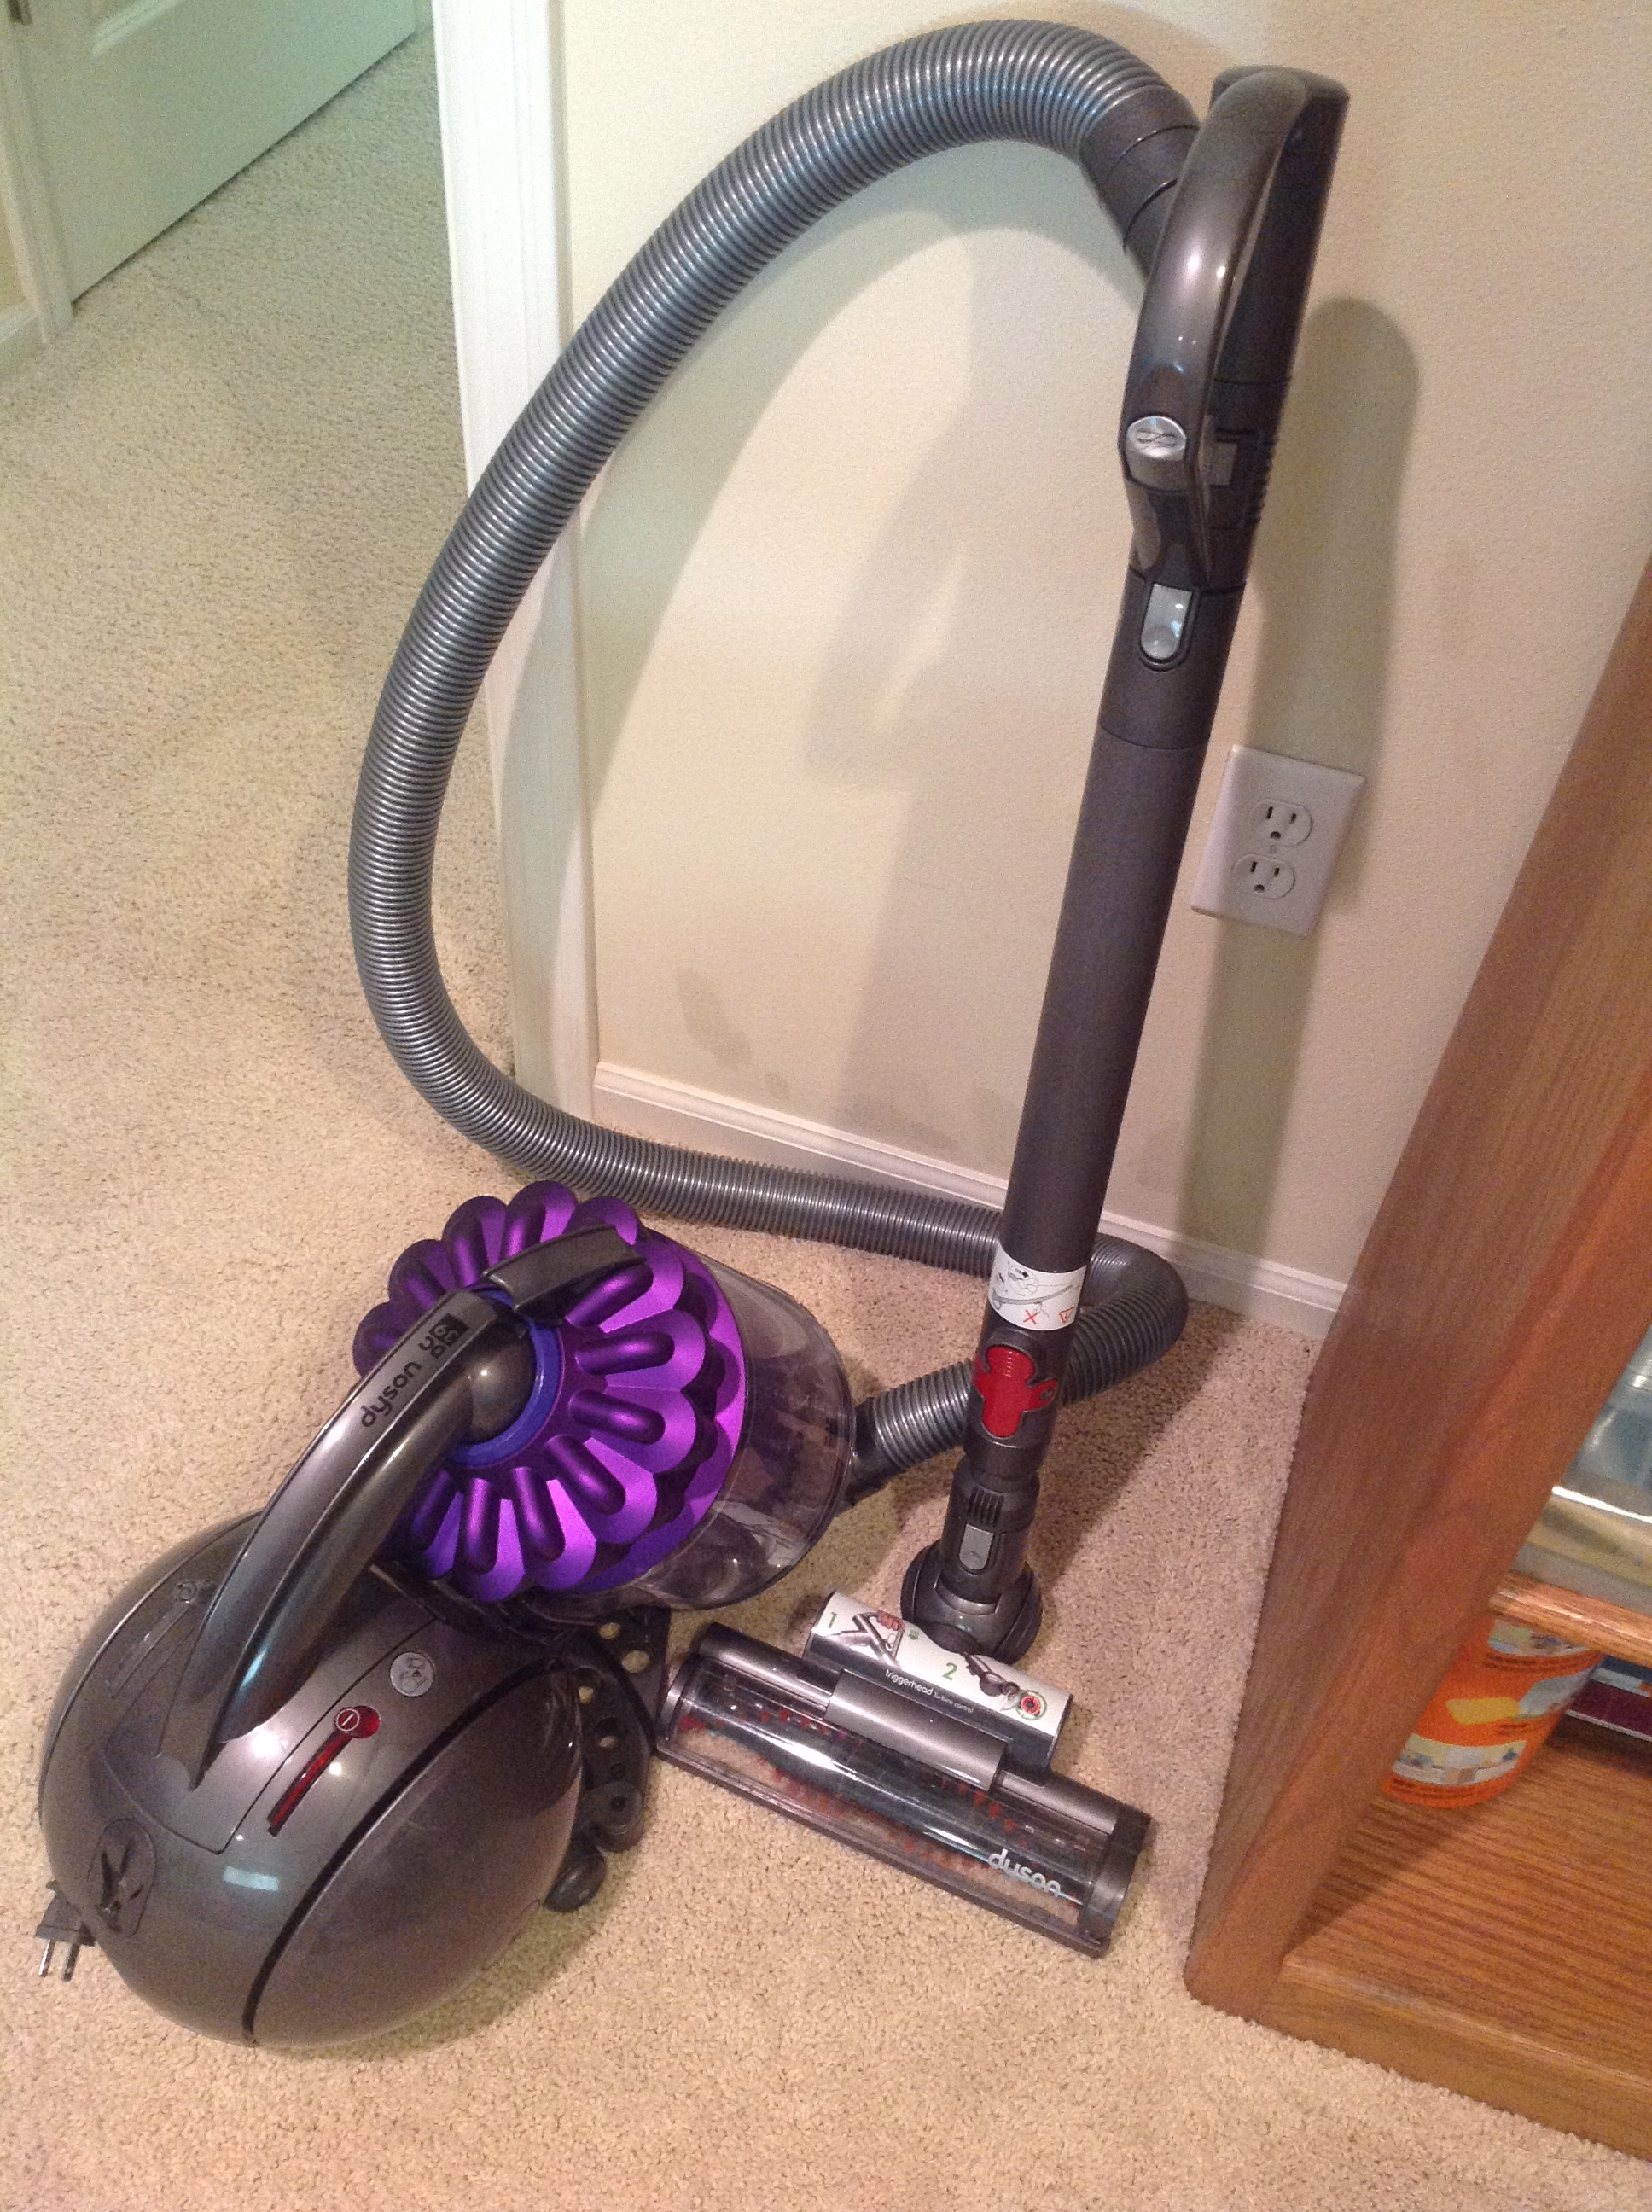 I finally got another vacuum cleaner for our 2nd floor. It's a Dyson DC39  multi floor vacuum. 